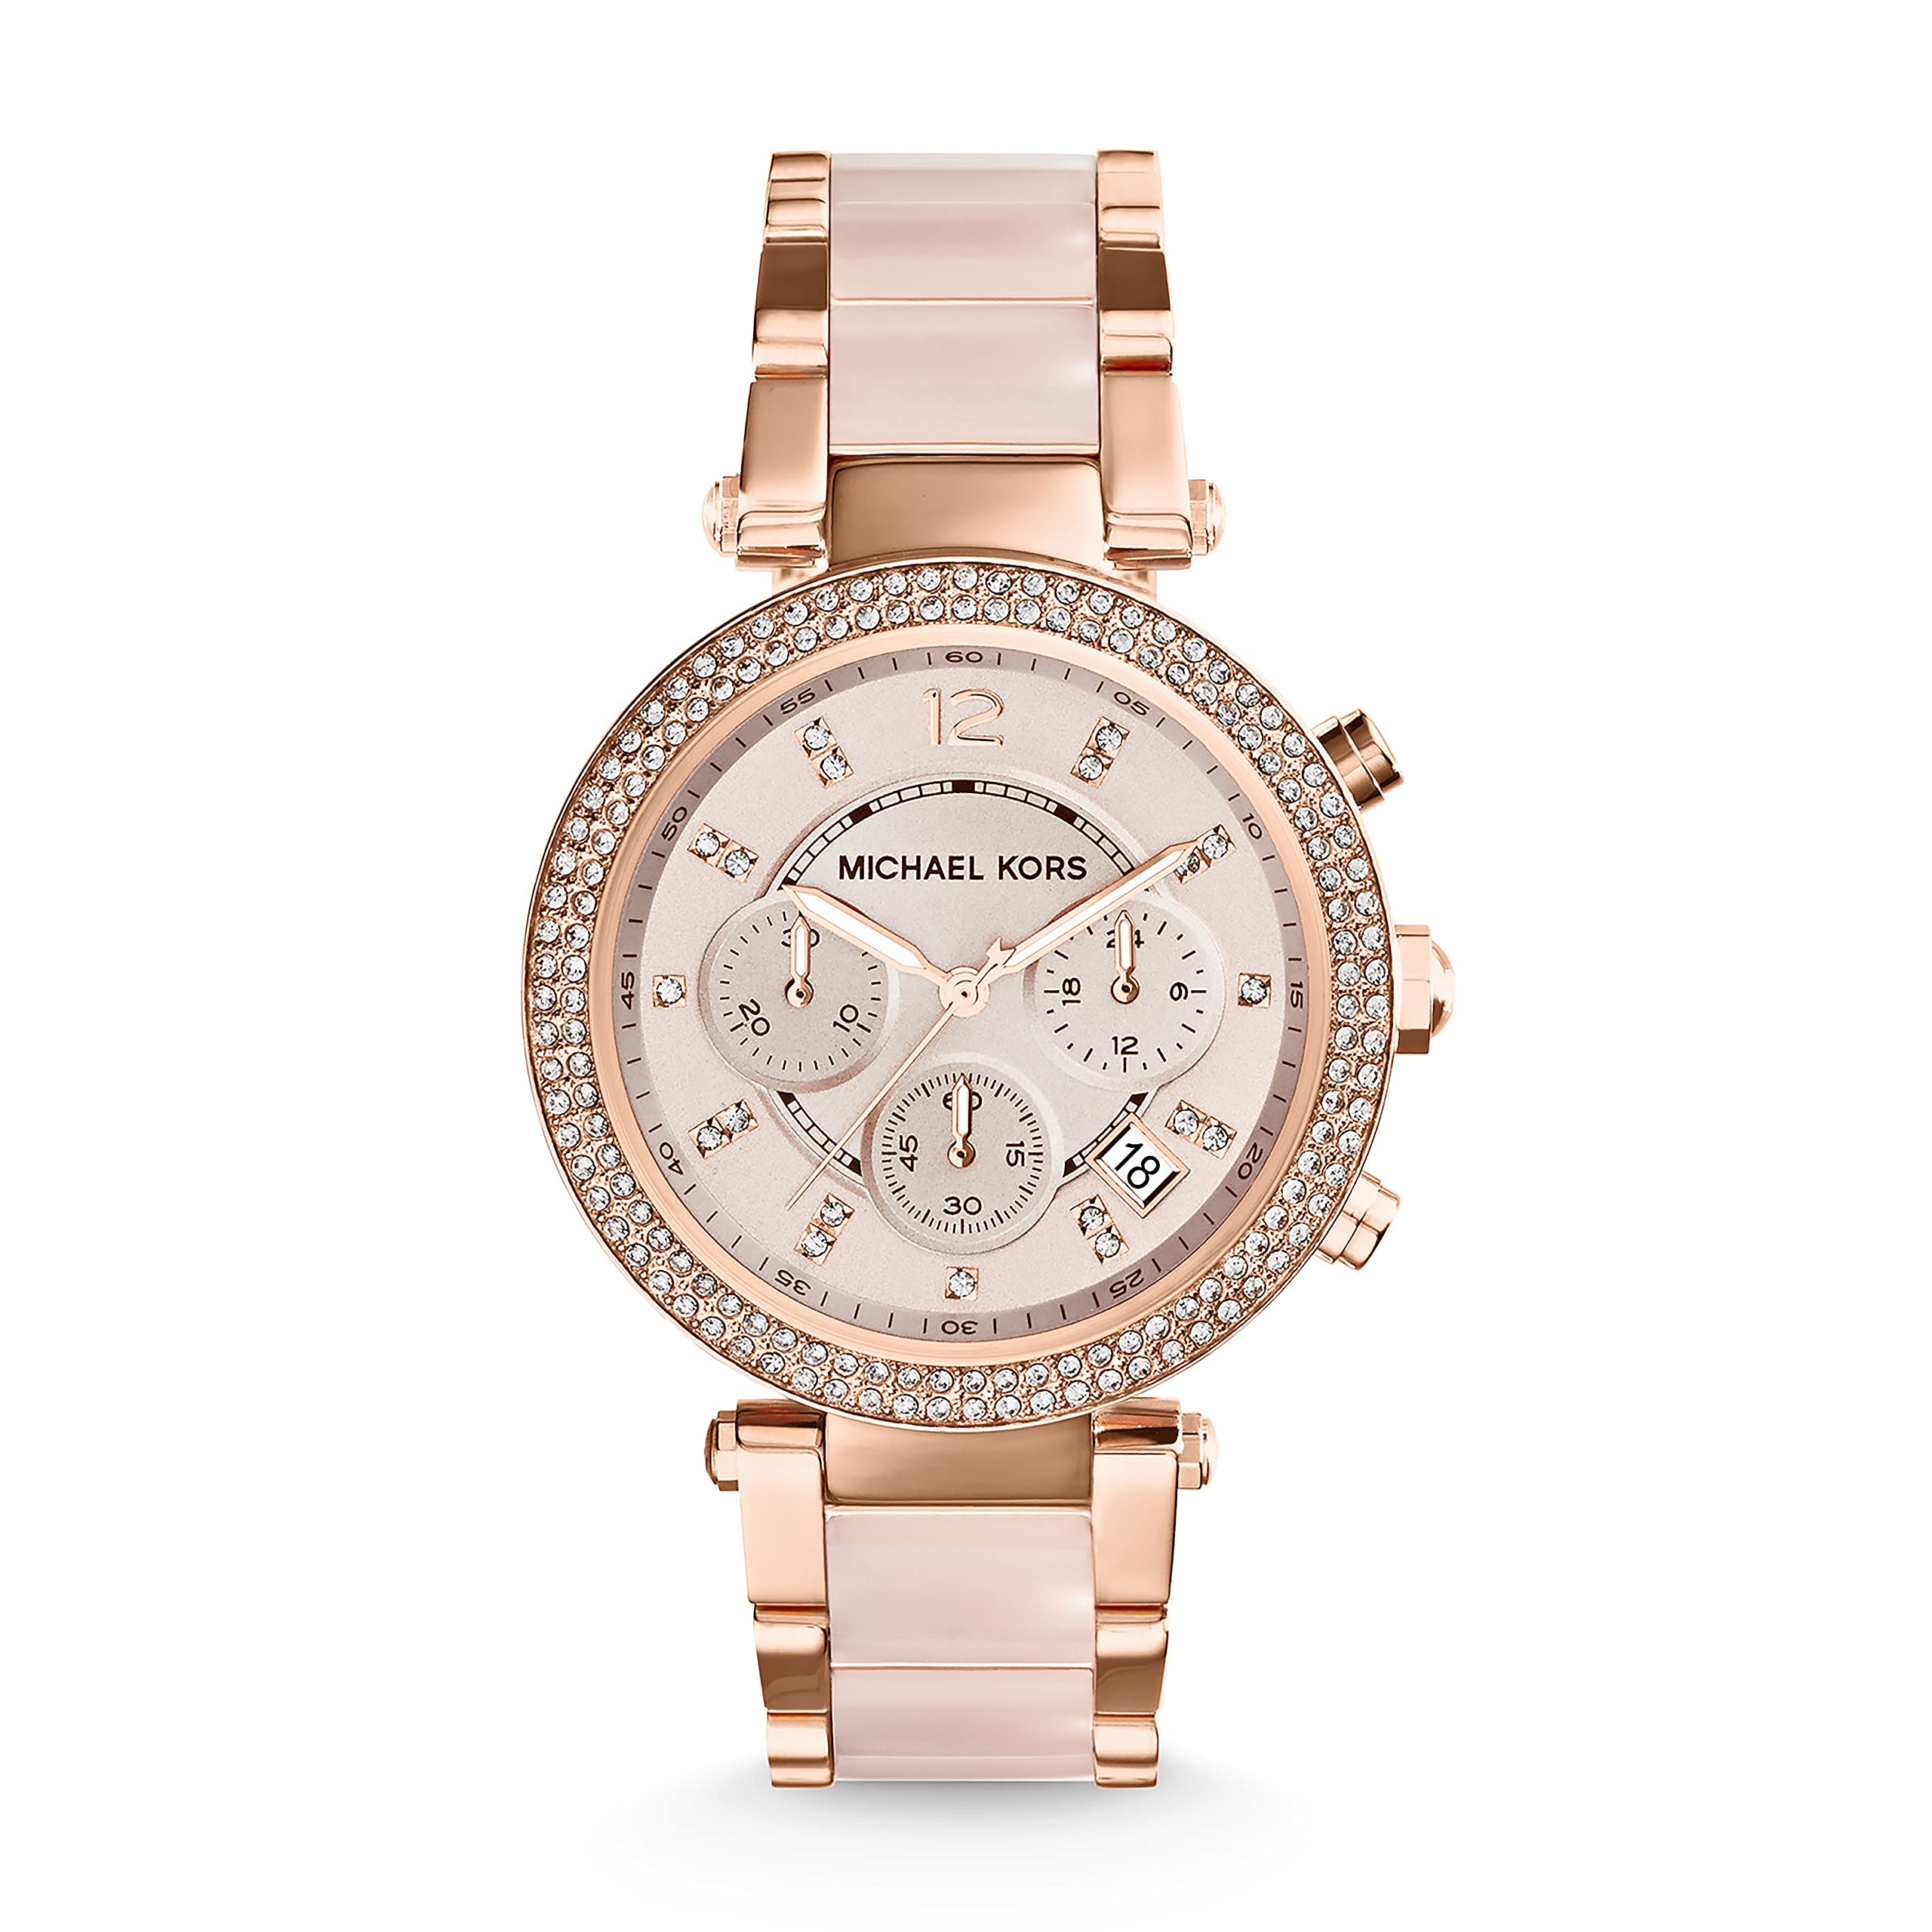 Michael Kors Darci 3 Hand Watch with Glitz Accents 39MM  Shopping From USA